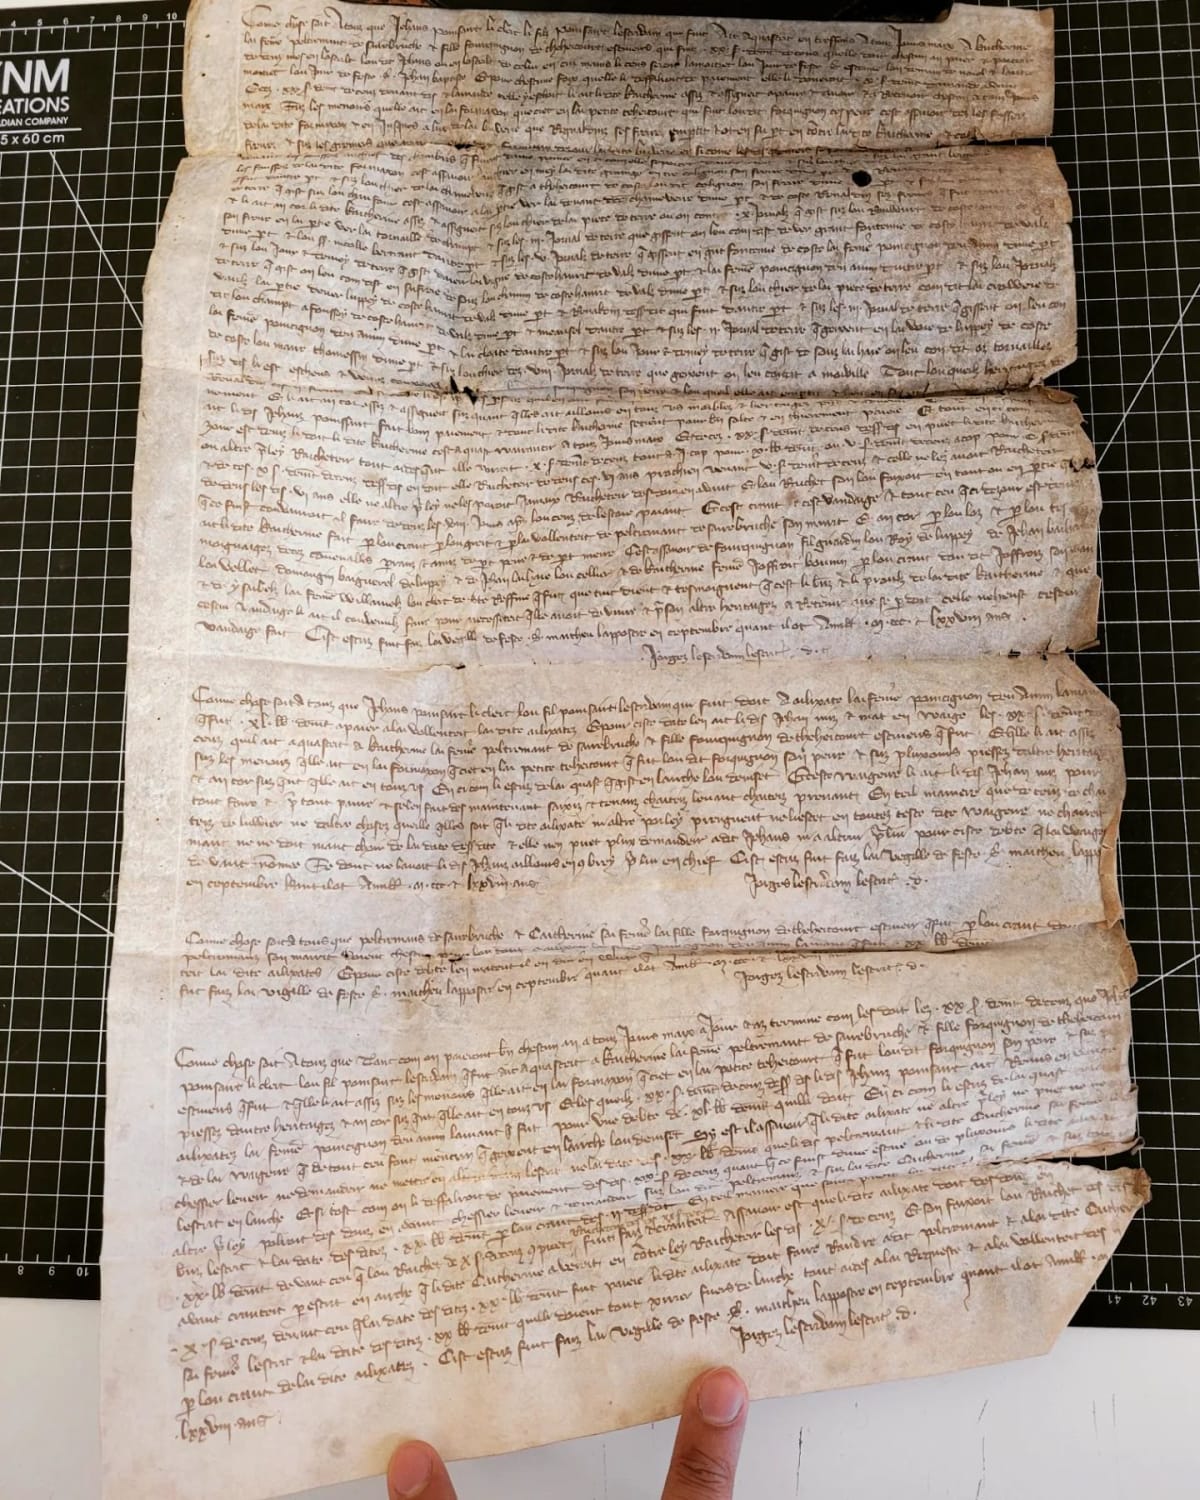 A medieval manuscript on parchment, dated 1378, written during the reign of Pope Urban VI. The oldest non-religious manuscript I've acquired so far.